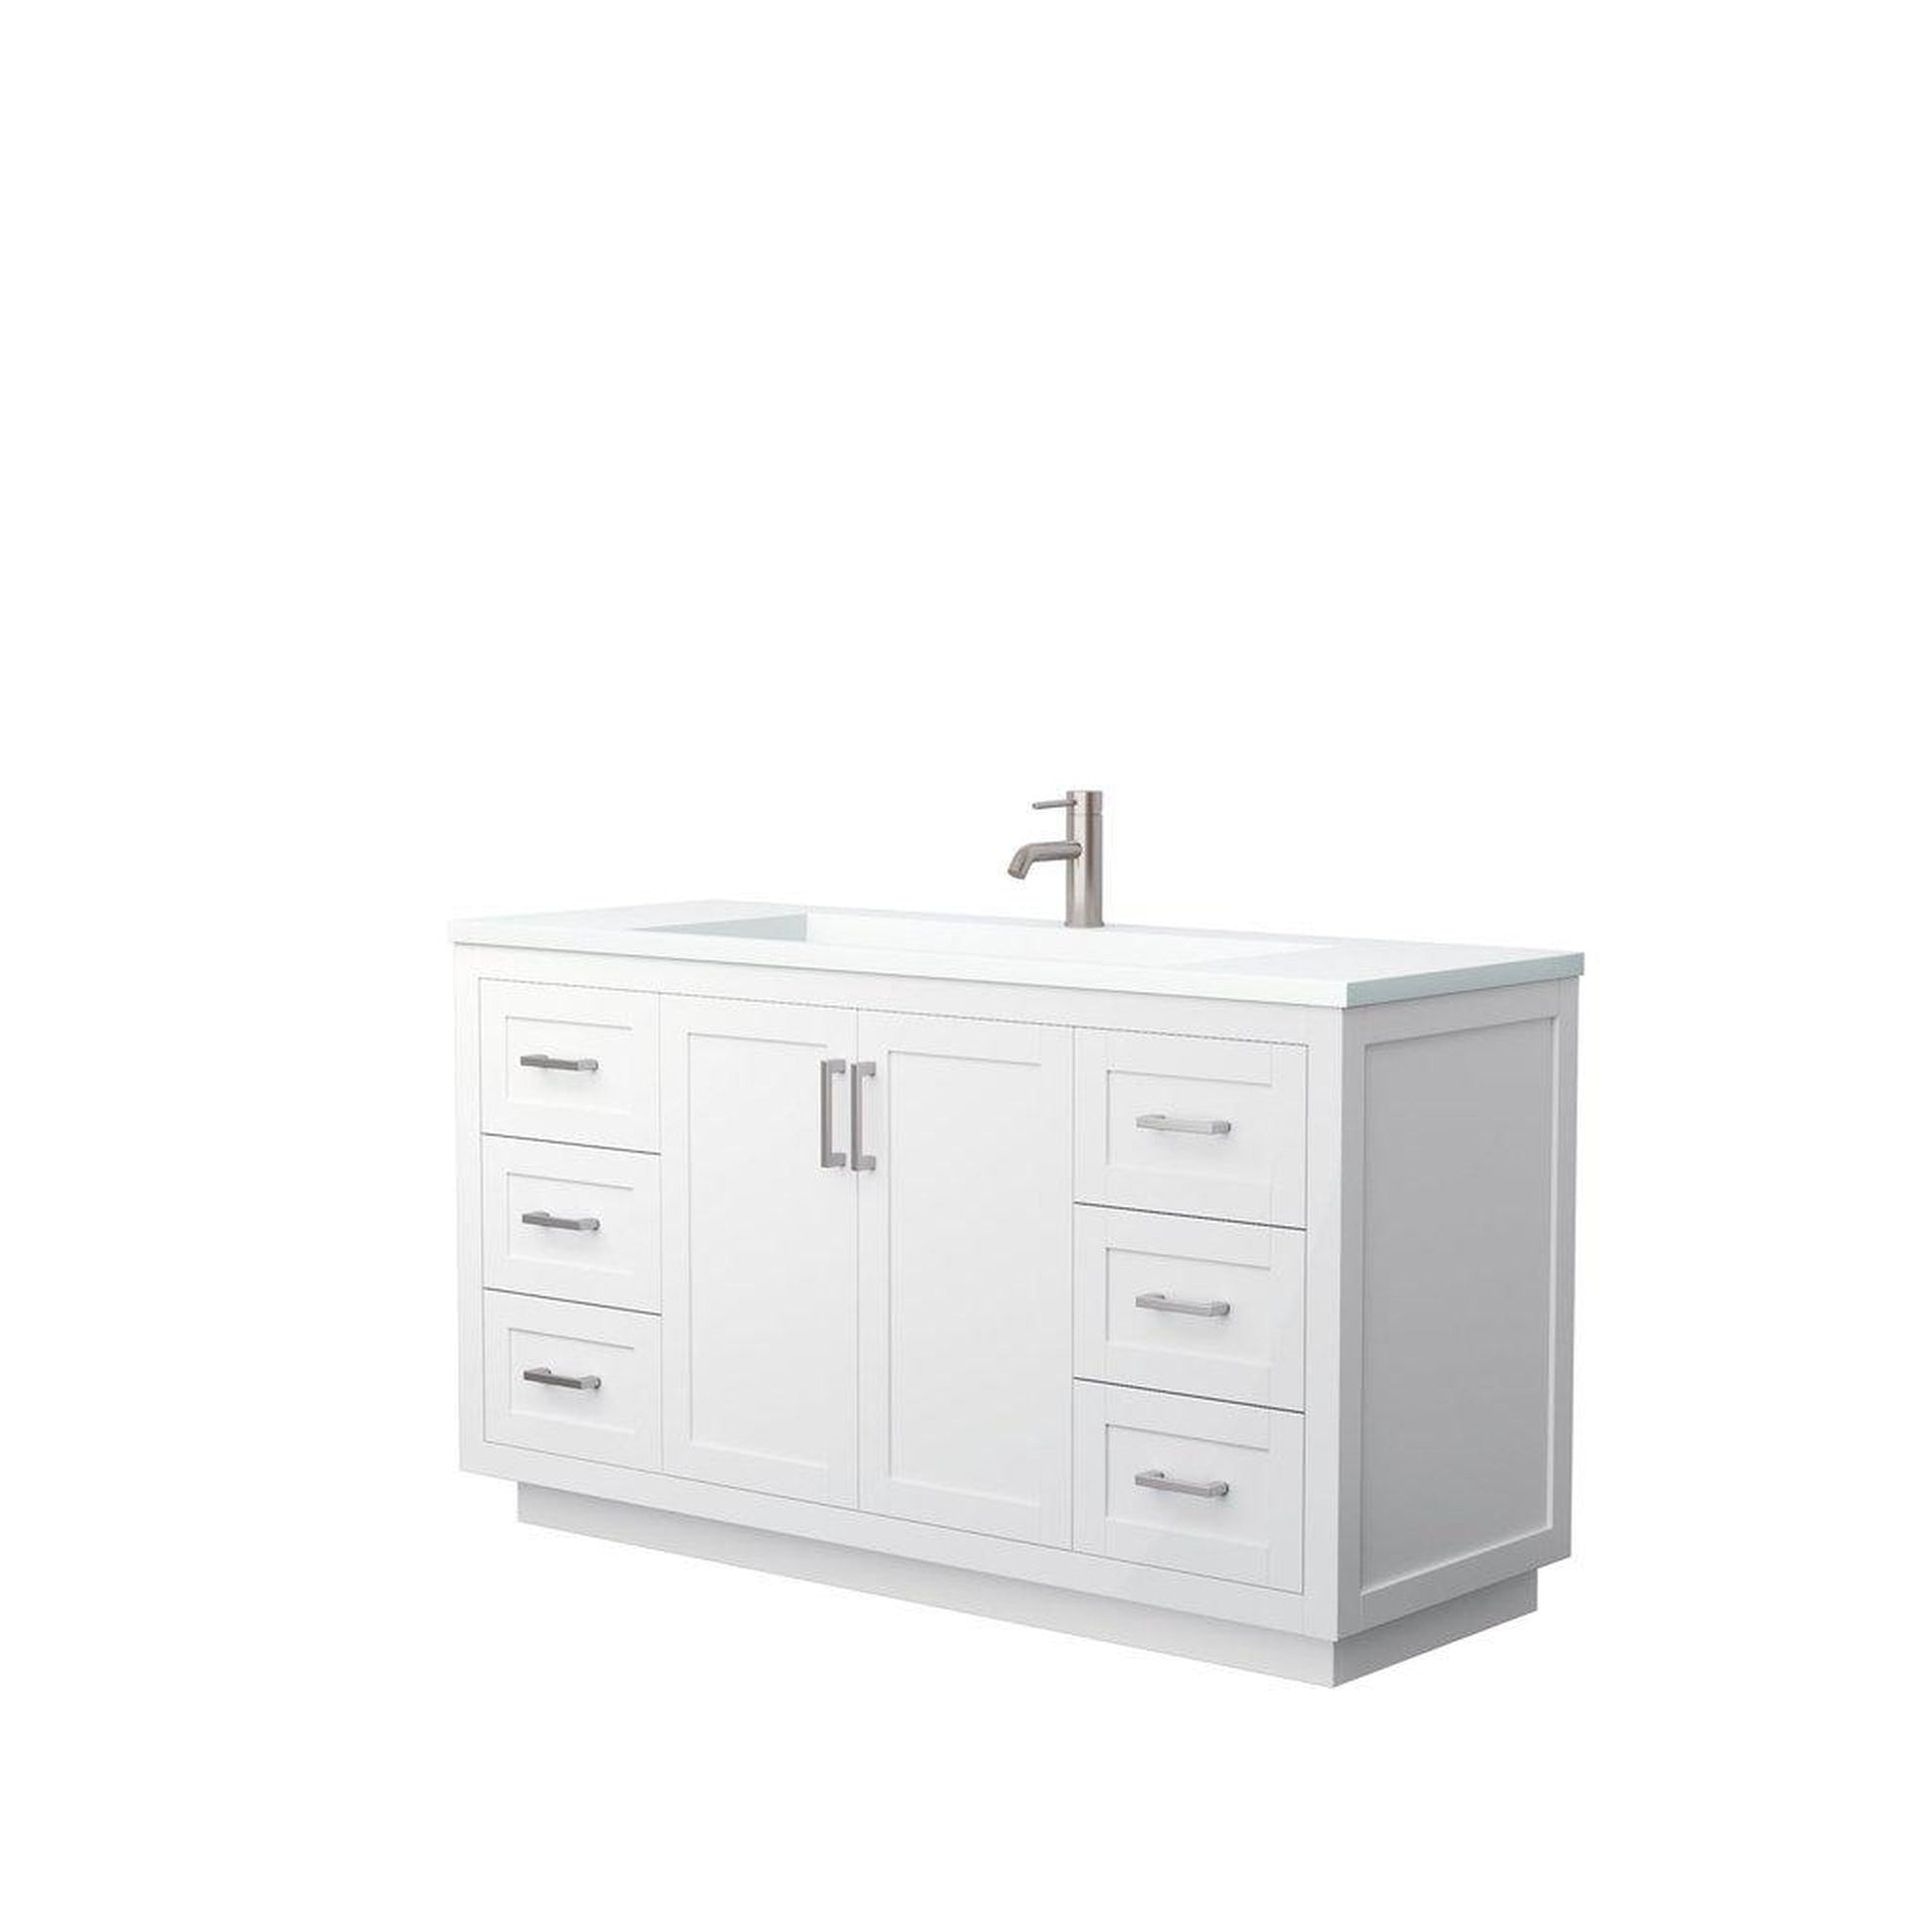 Wyndham Collection Miranda 60" Single Bathroom White Vanity Set With 1.25" Thick Matte White Solid Surface Countertop, Integrated Sink, And Brushed Nickel Trim